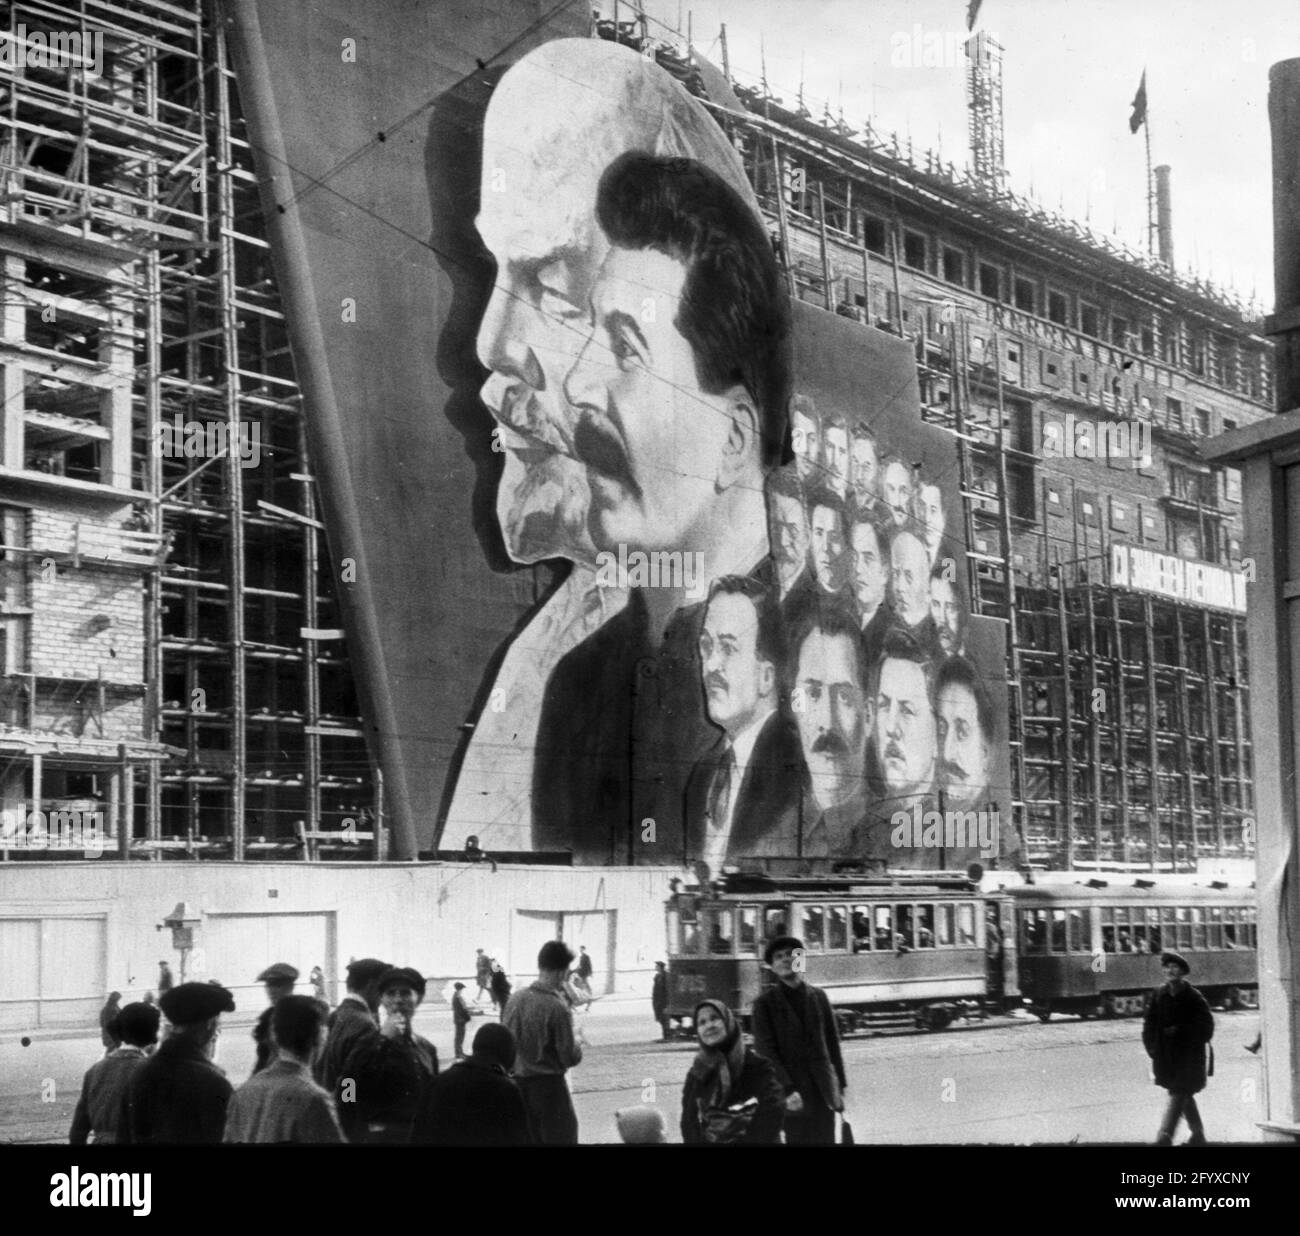 A large poster with portraits of Russian political leaders Vladimir Lenin, Joseph Stalin and others for the May Day parade hangs over the scaffolding of a building under construction, Moscow, Russia, 1934. (Photo by Burton Holmes) Stock Photo